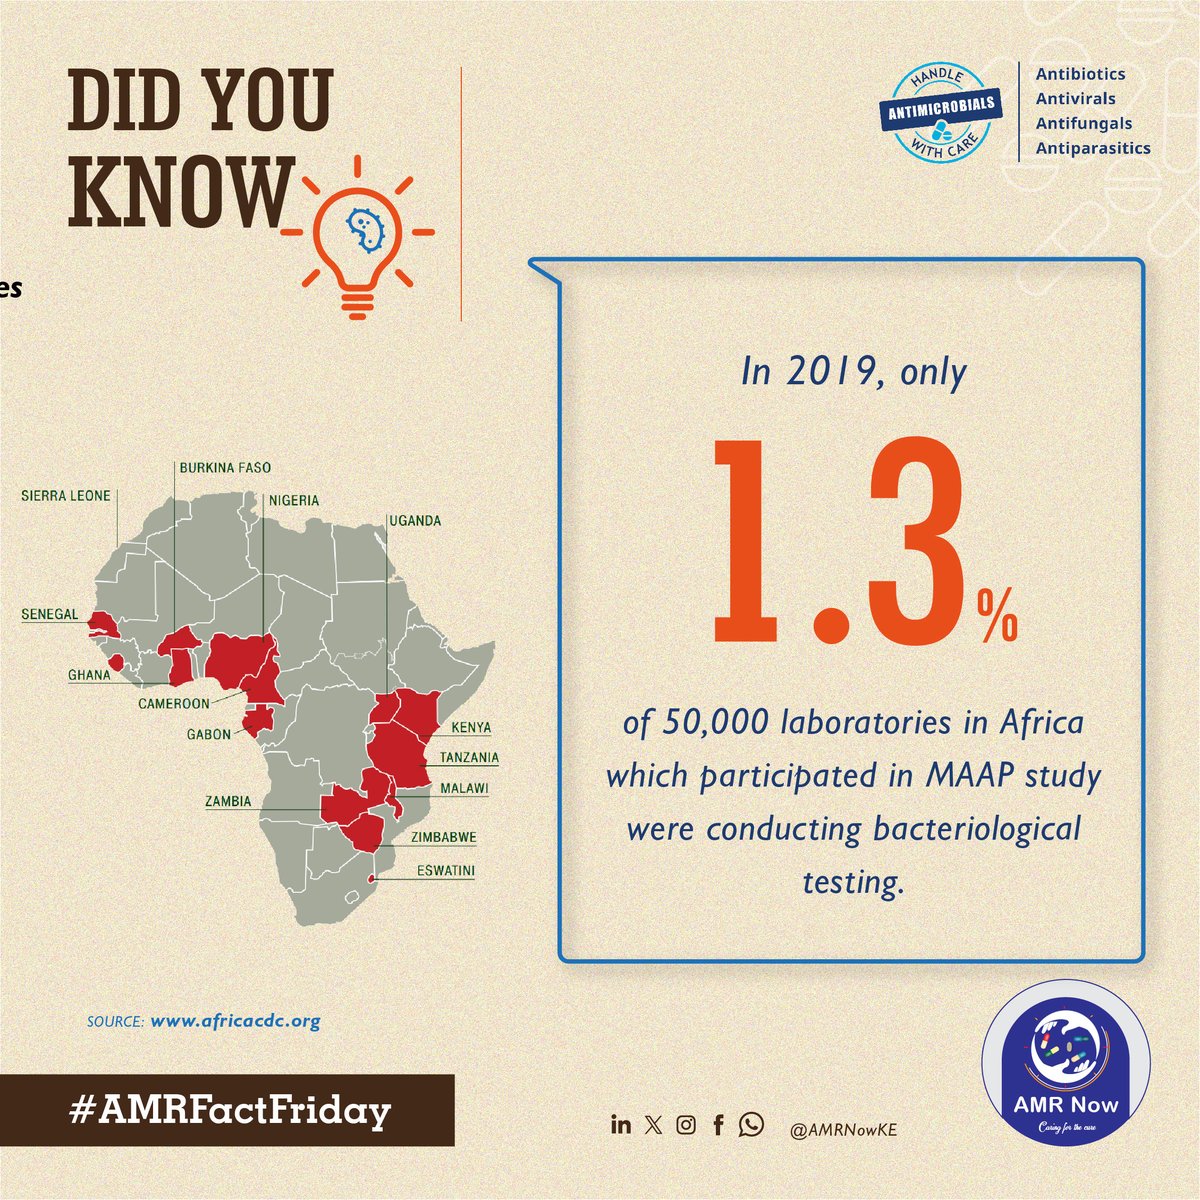 🦠#AMRFactFriday ⁉️DYK? Poor access to quality, affordable medicines, vaccines and diagnostics; are among the factors fueling the emergence & spread of antimicrobial resistance. 💡 According to MAAP Study, only 1.3% of 50,000 laboratories in Africa perform bacteriological